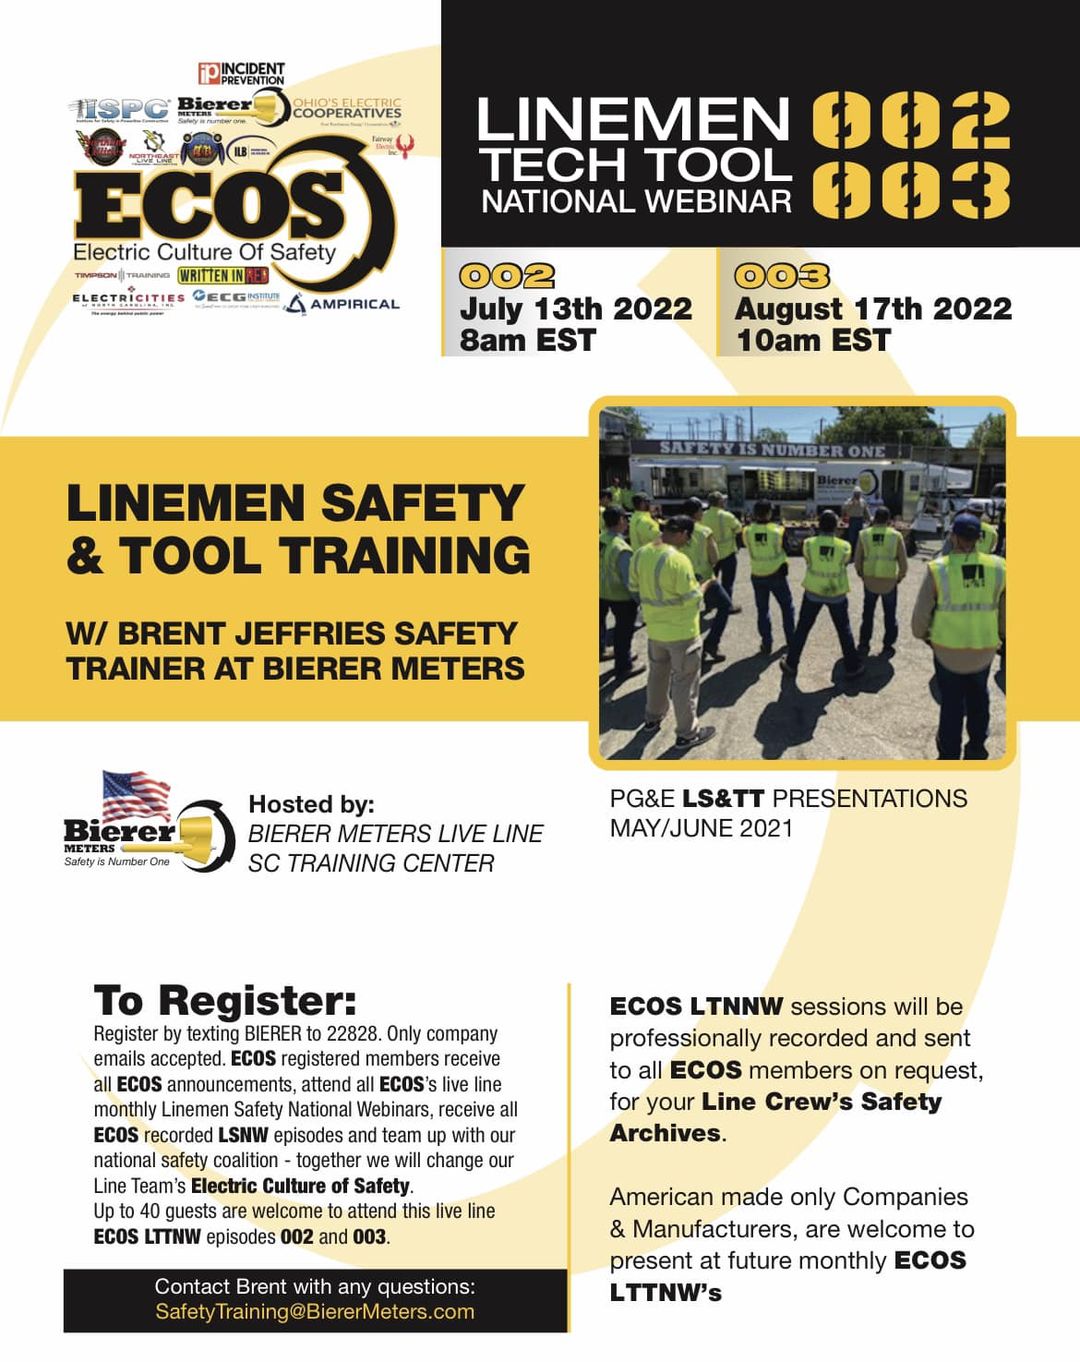 Linemen Tech Tool Webinar 002-003: Linemen Safety and Tool Training – ECOS